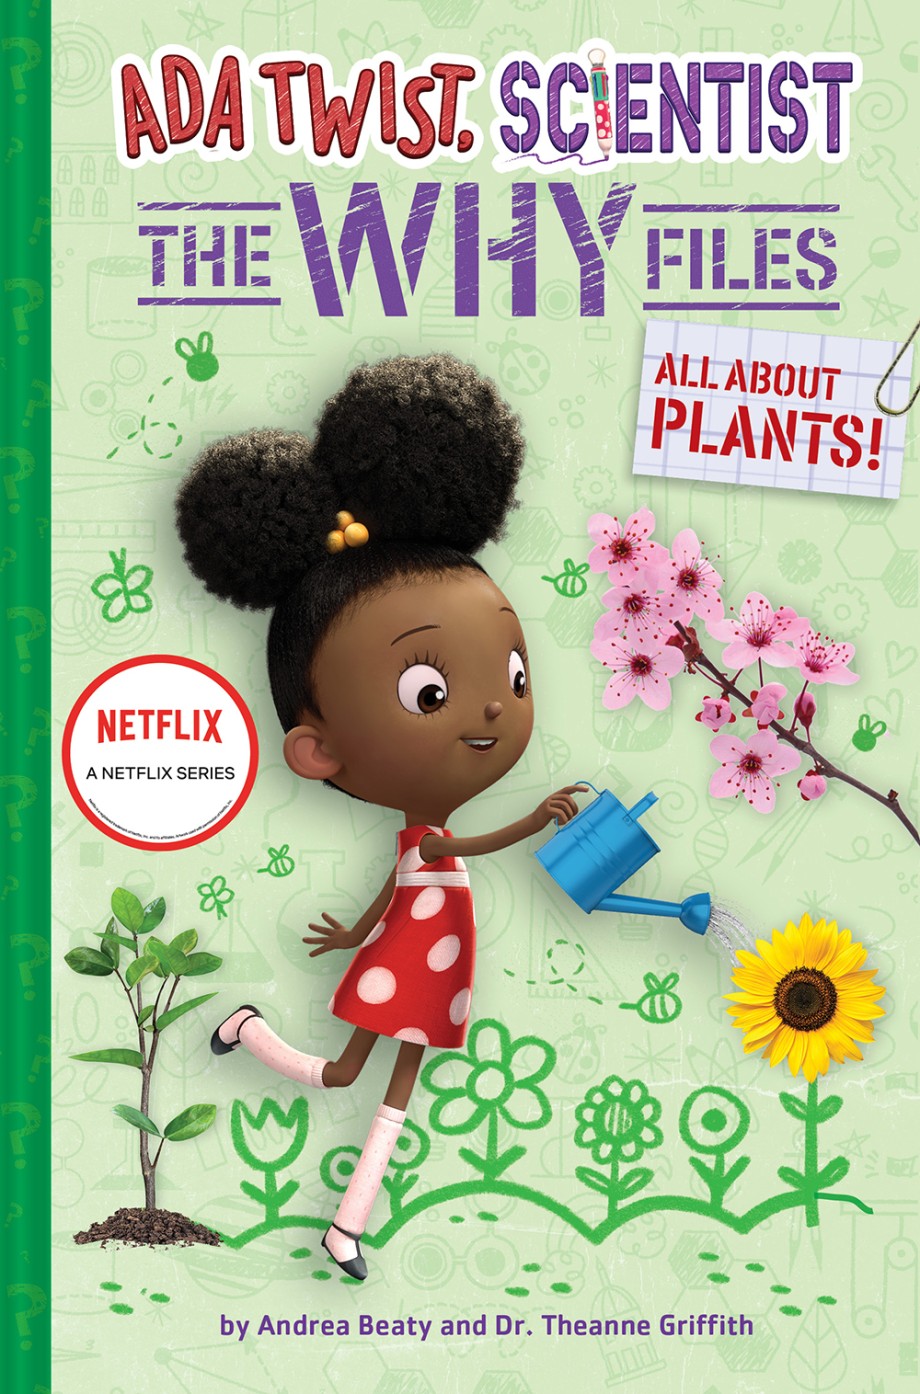 All About Plants! (Ada Twist, Scientist: The Why Files #2) 